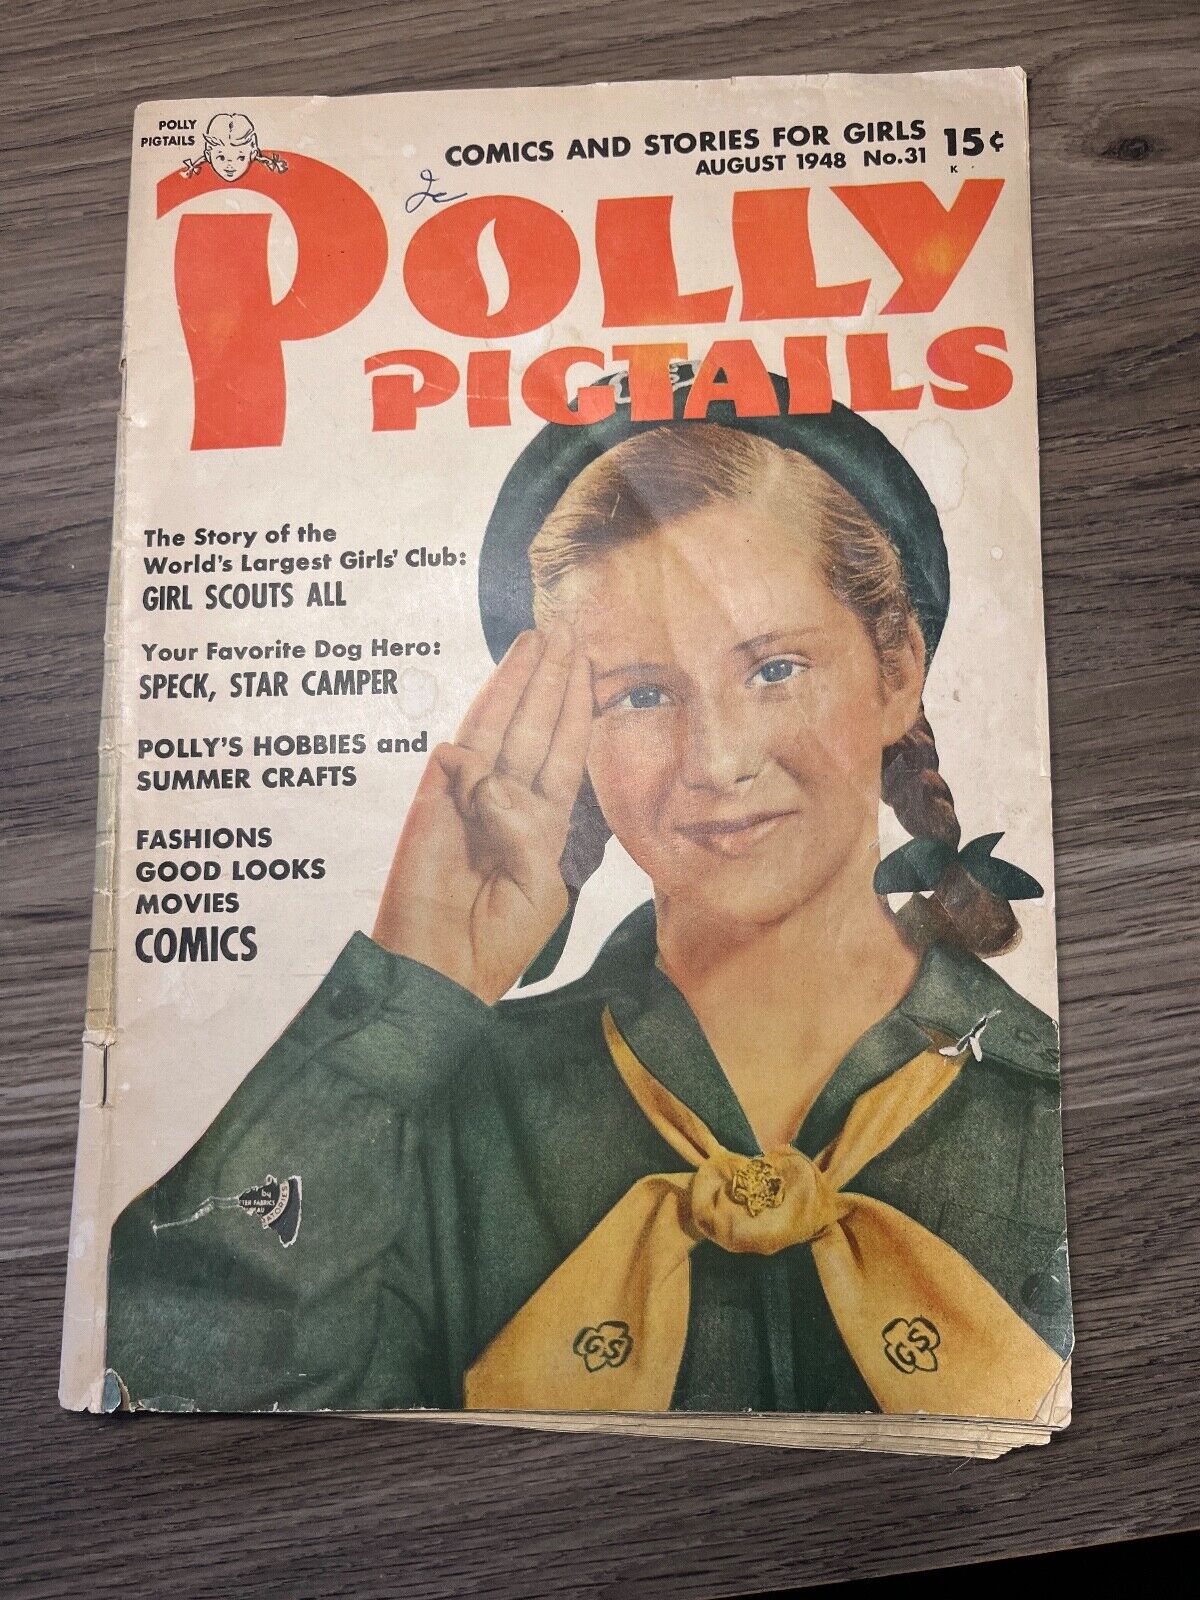 1948 POLLY PIGTAILS Comics & Stories for Girls Magazine #31 VG 4.0